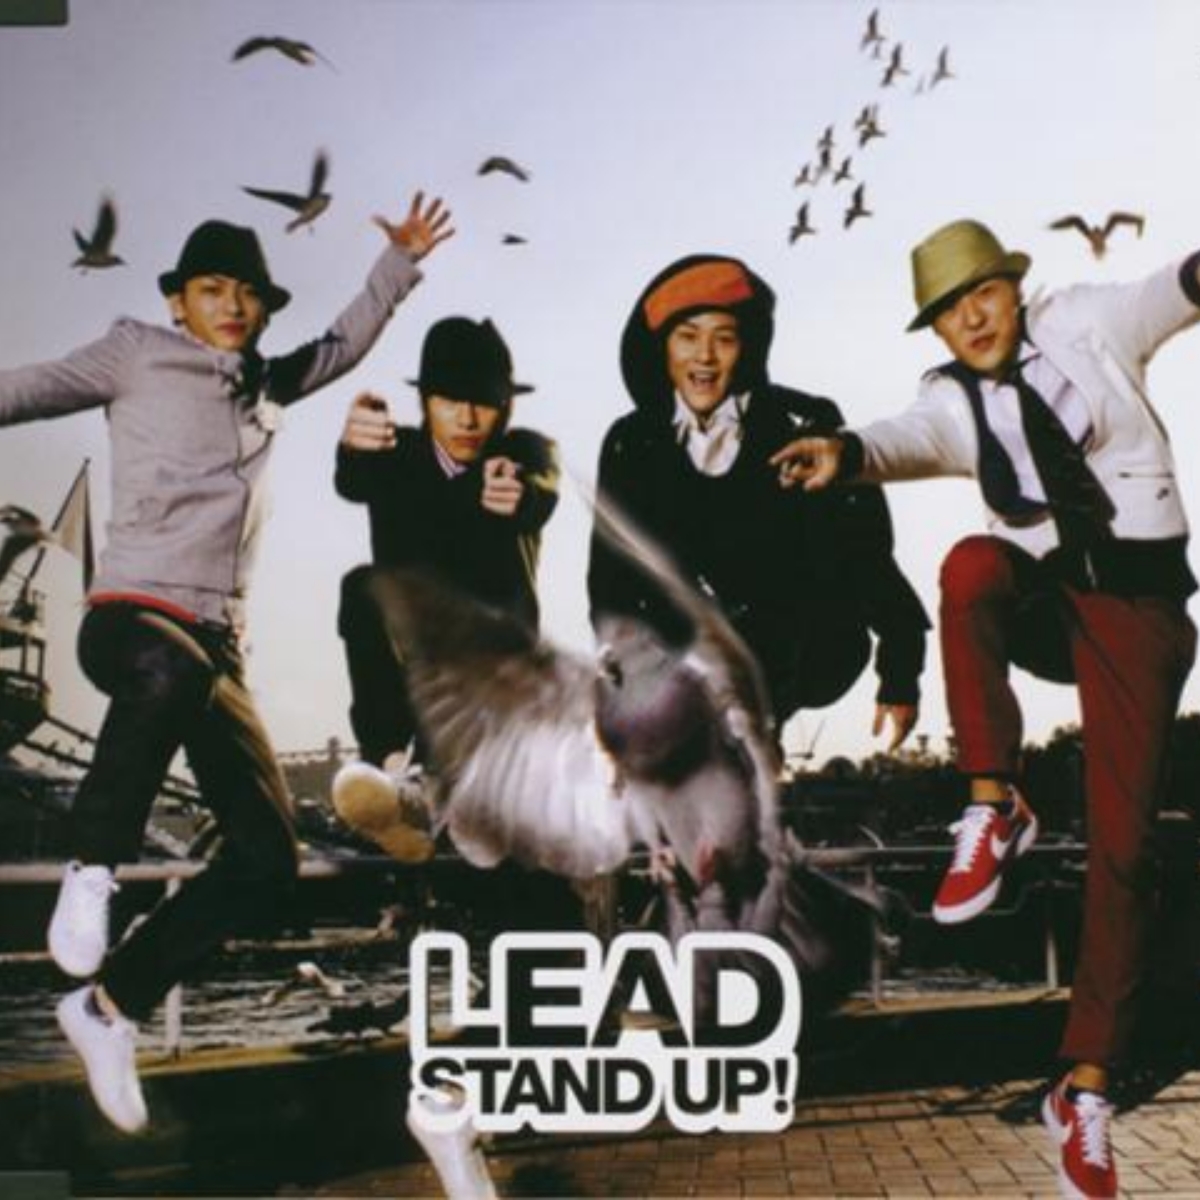 Lead - STAND UP!